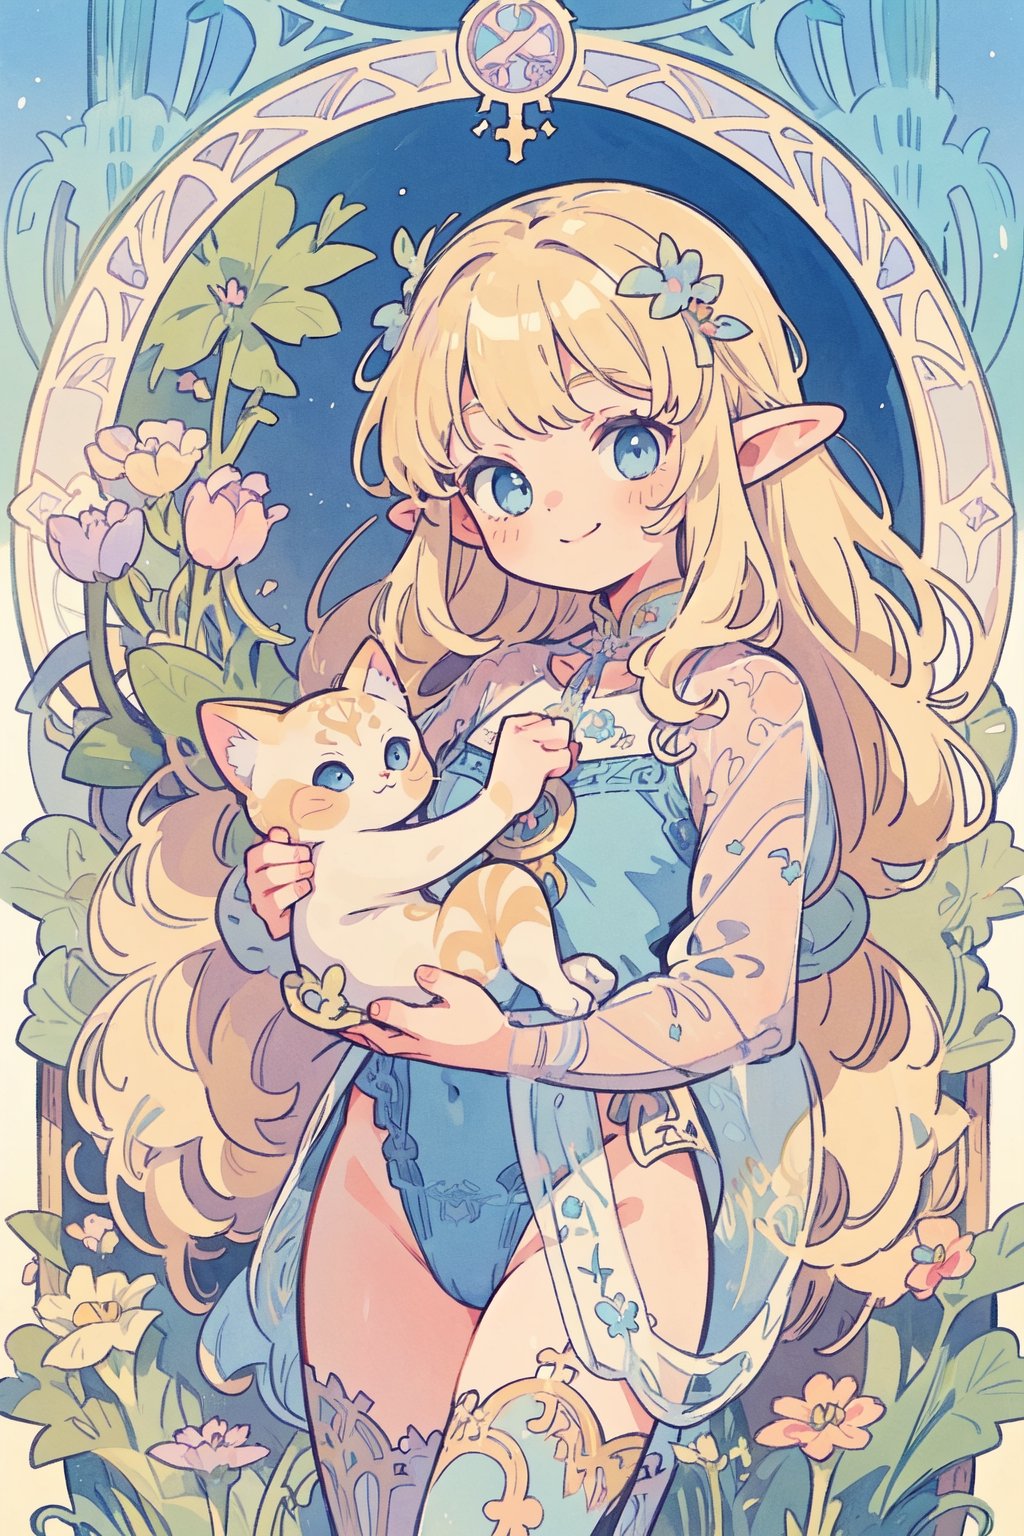 (masterpiece, best quality, highly detailed, ultra-detailed, intricate), illustration, pastel colors, art_nouveau, Art Nouveau by Alphonse Mucha, tarot, A teenage female elf, blonde hair, blue eyes, wearing lingerie, see-through, carrying a cat in her hand, is smiling,  full of innocence, innocence and no fear. The Fool card represents a new beginning, new adventures and challenges, and a spirit of faith, courage, and optimism,watercolor,masterpiece,kawaiitech